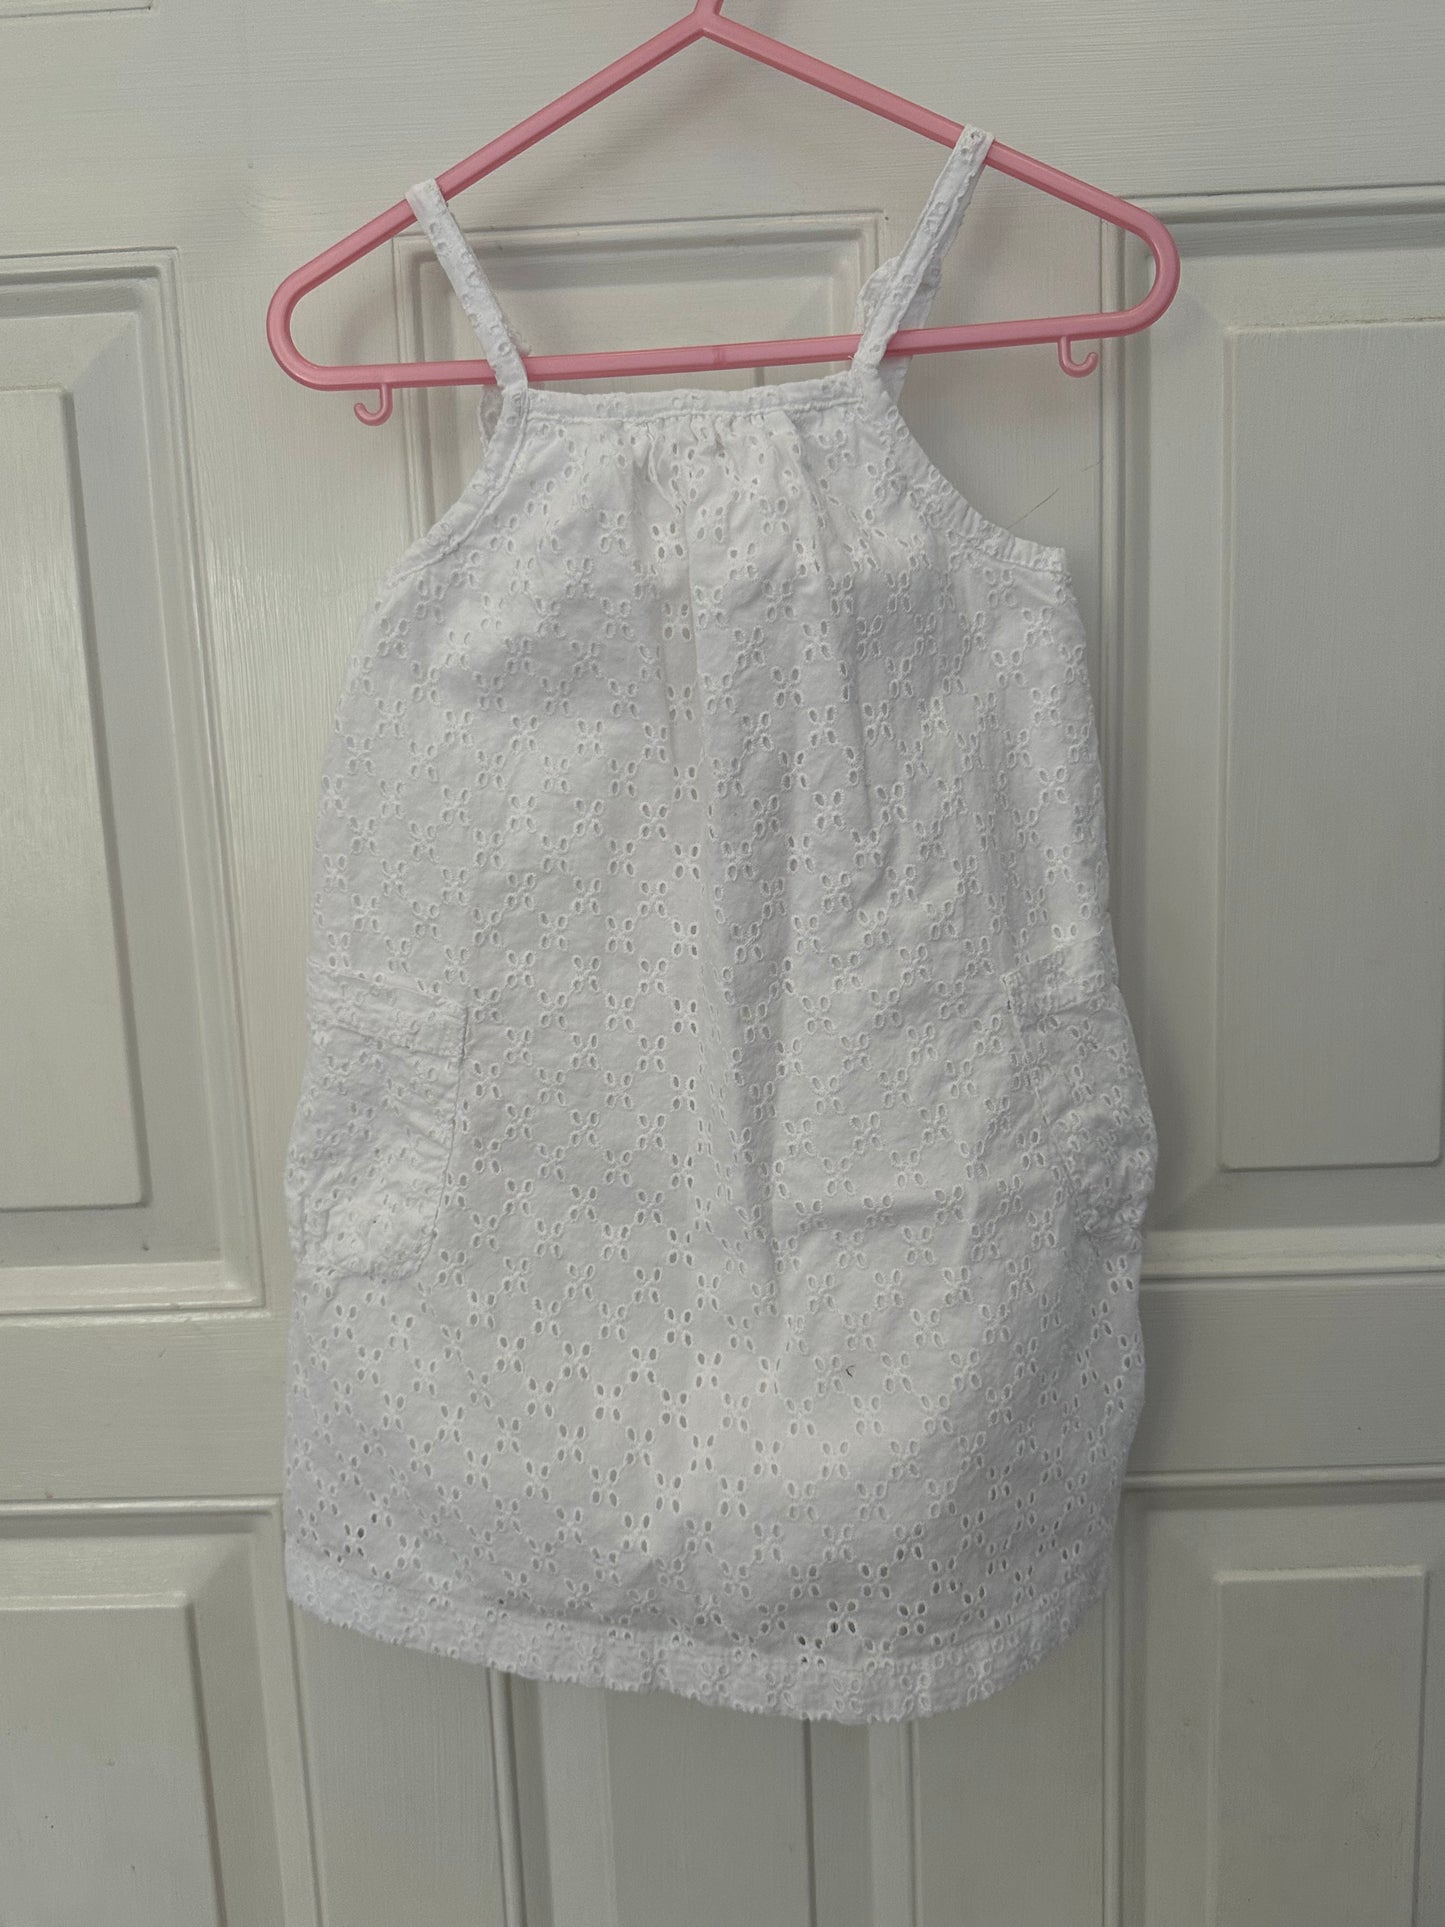 Hanna Anderson Girls White Beach Dress Sz 90. Which is size 2-3